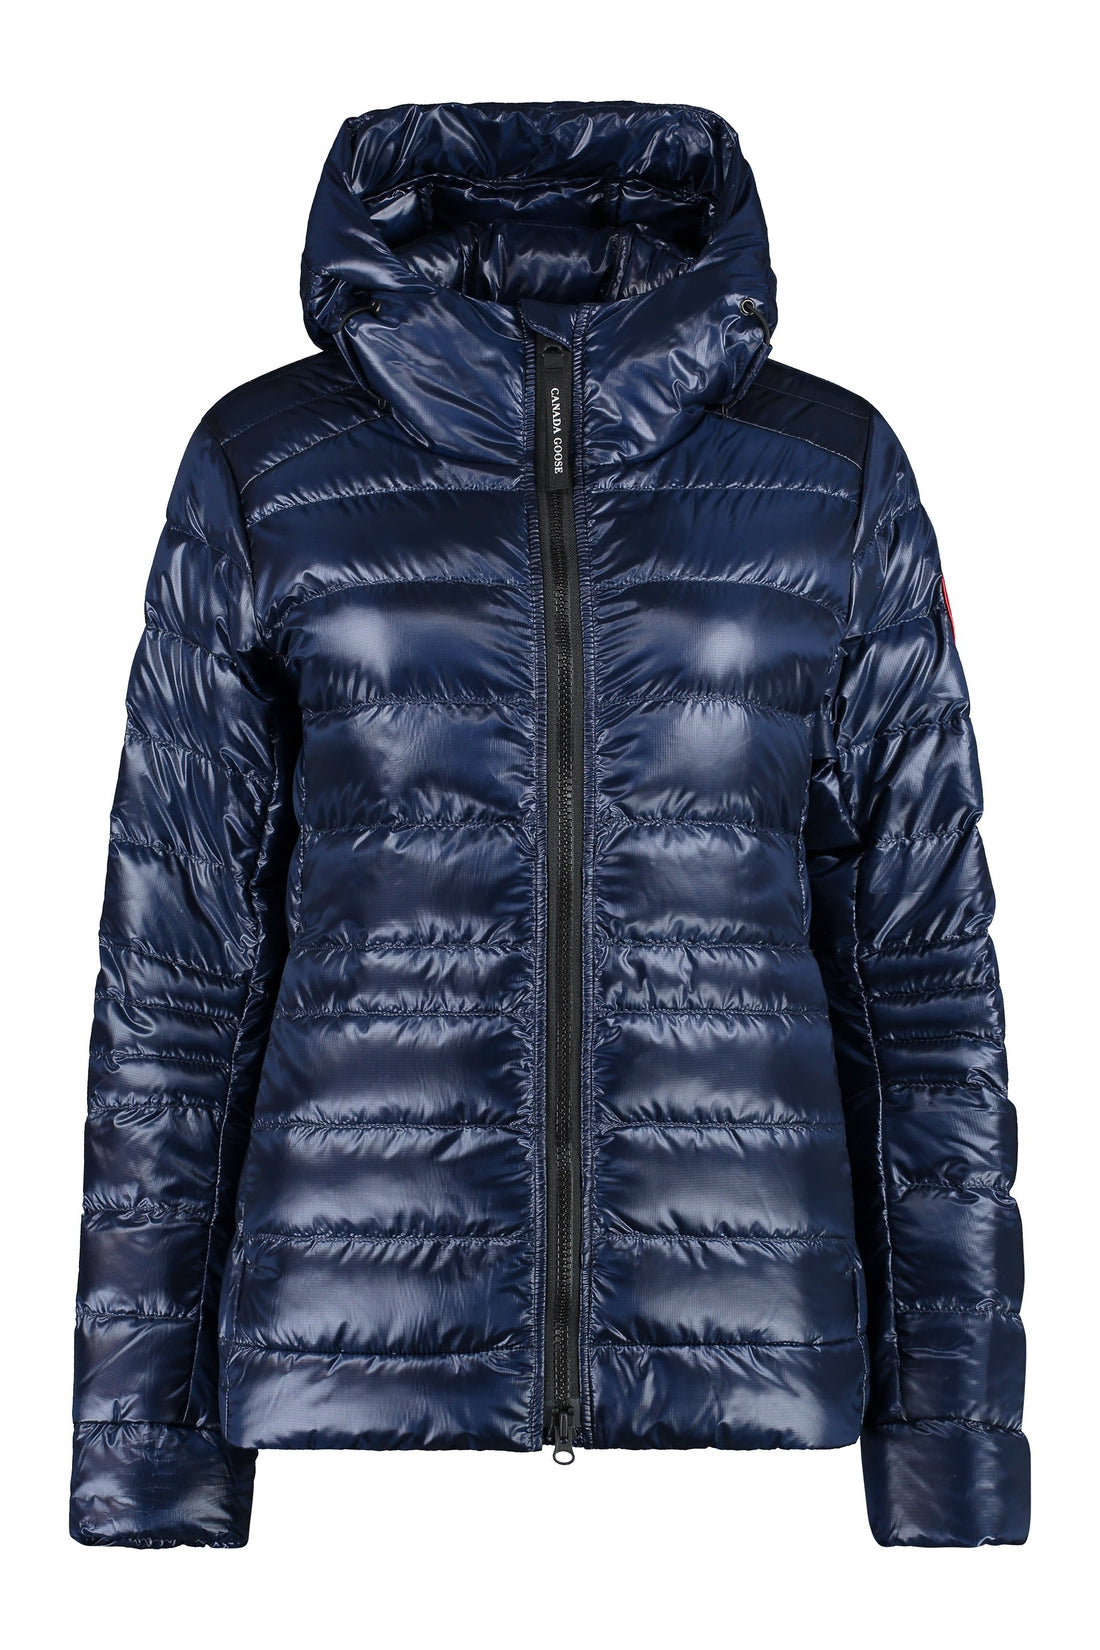 Canada Goose-OUTLET-SALE-Cypress hooded short down jacket-ARCHIVIST